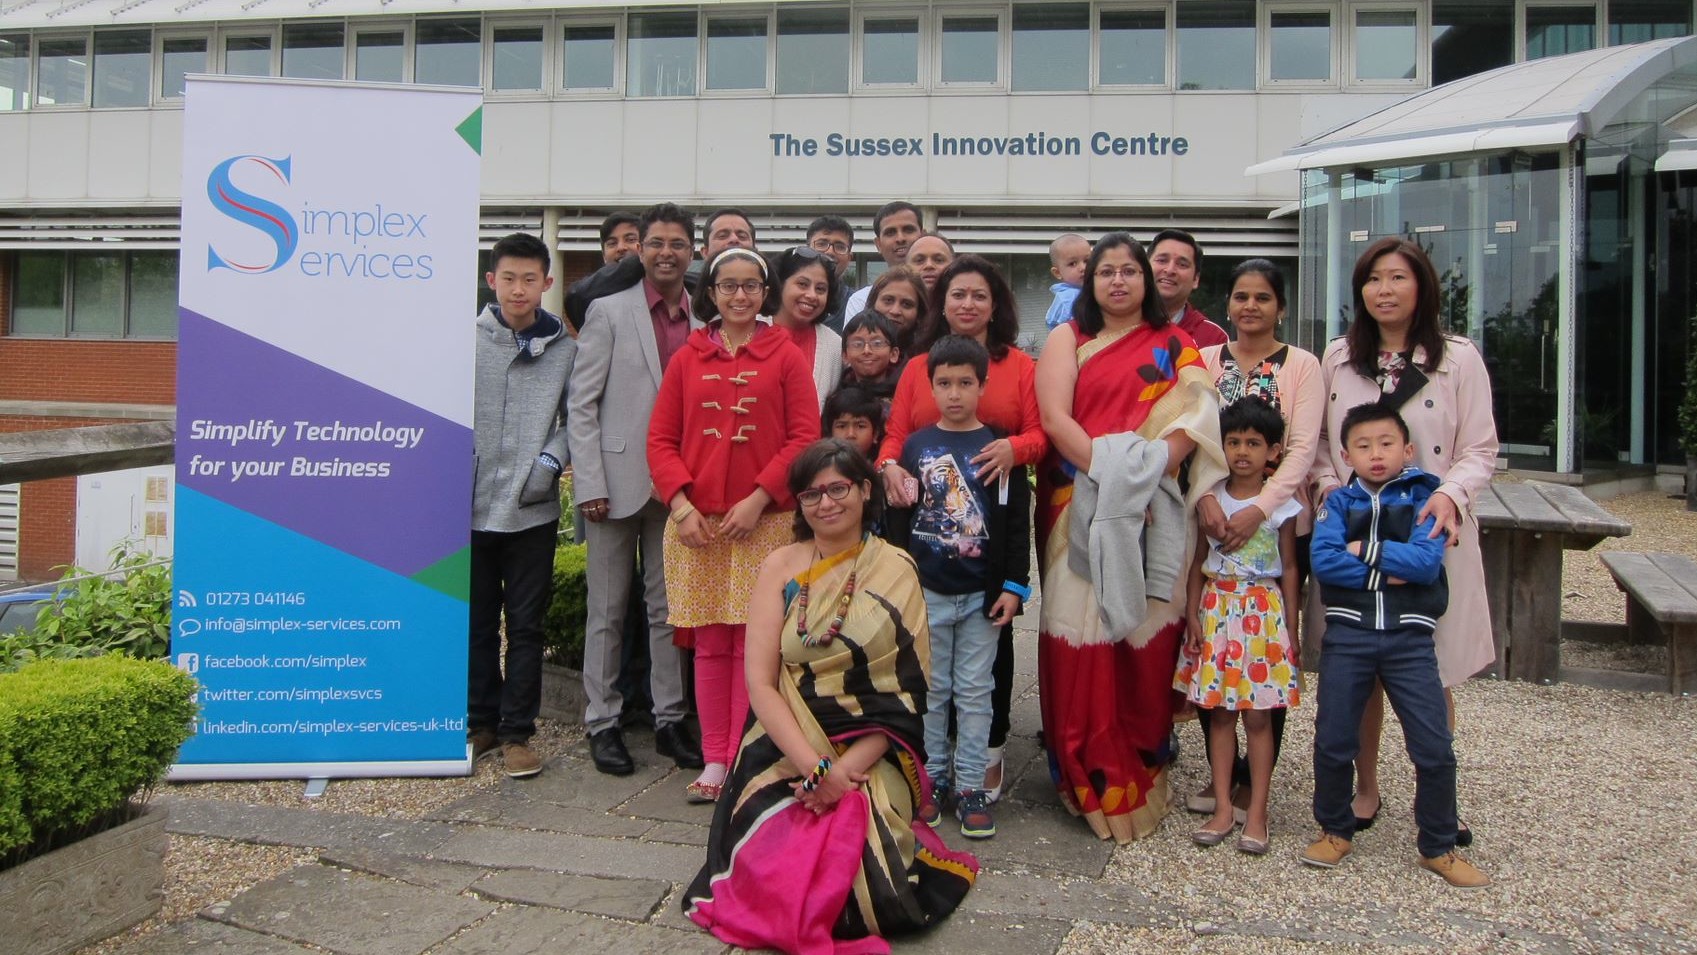 Team Simplex with their families at the Sussex Innovation Centre